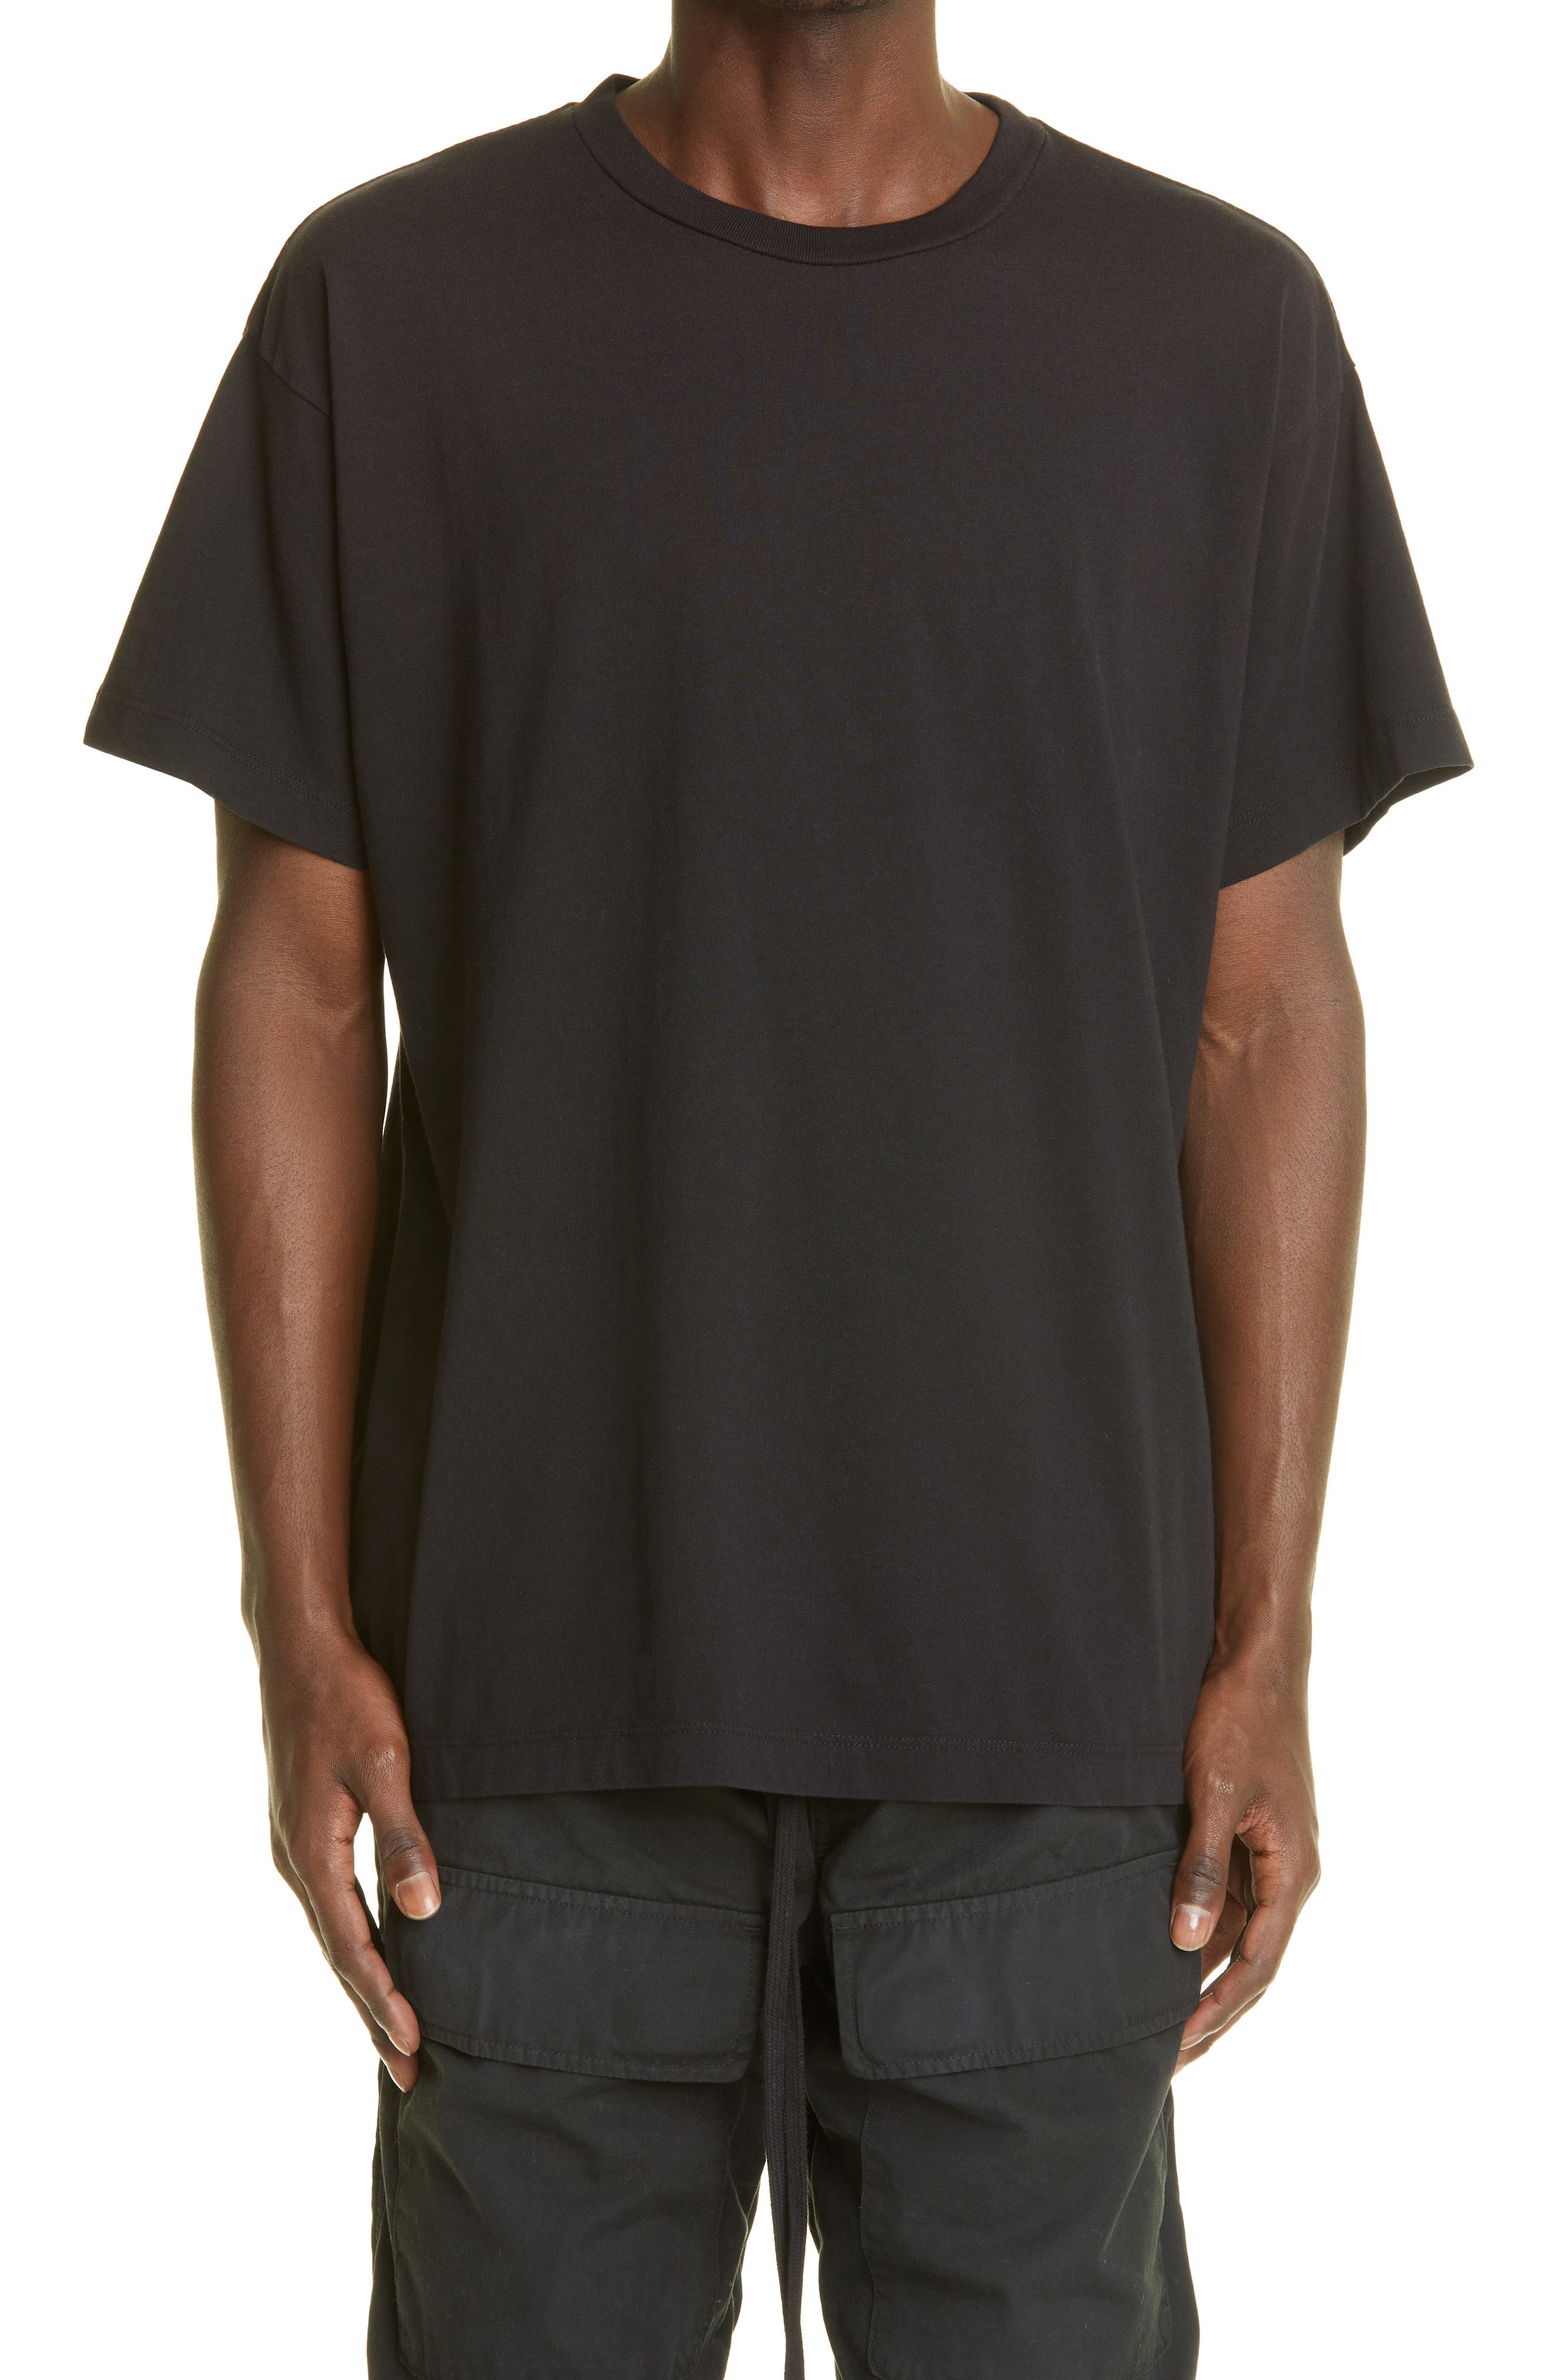 Fear of God FG7C Cotton Graphic Tee in Vintage Black at Nordstrom, Size X-Small